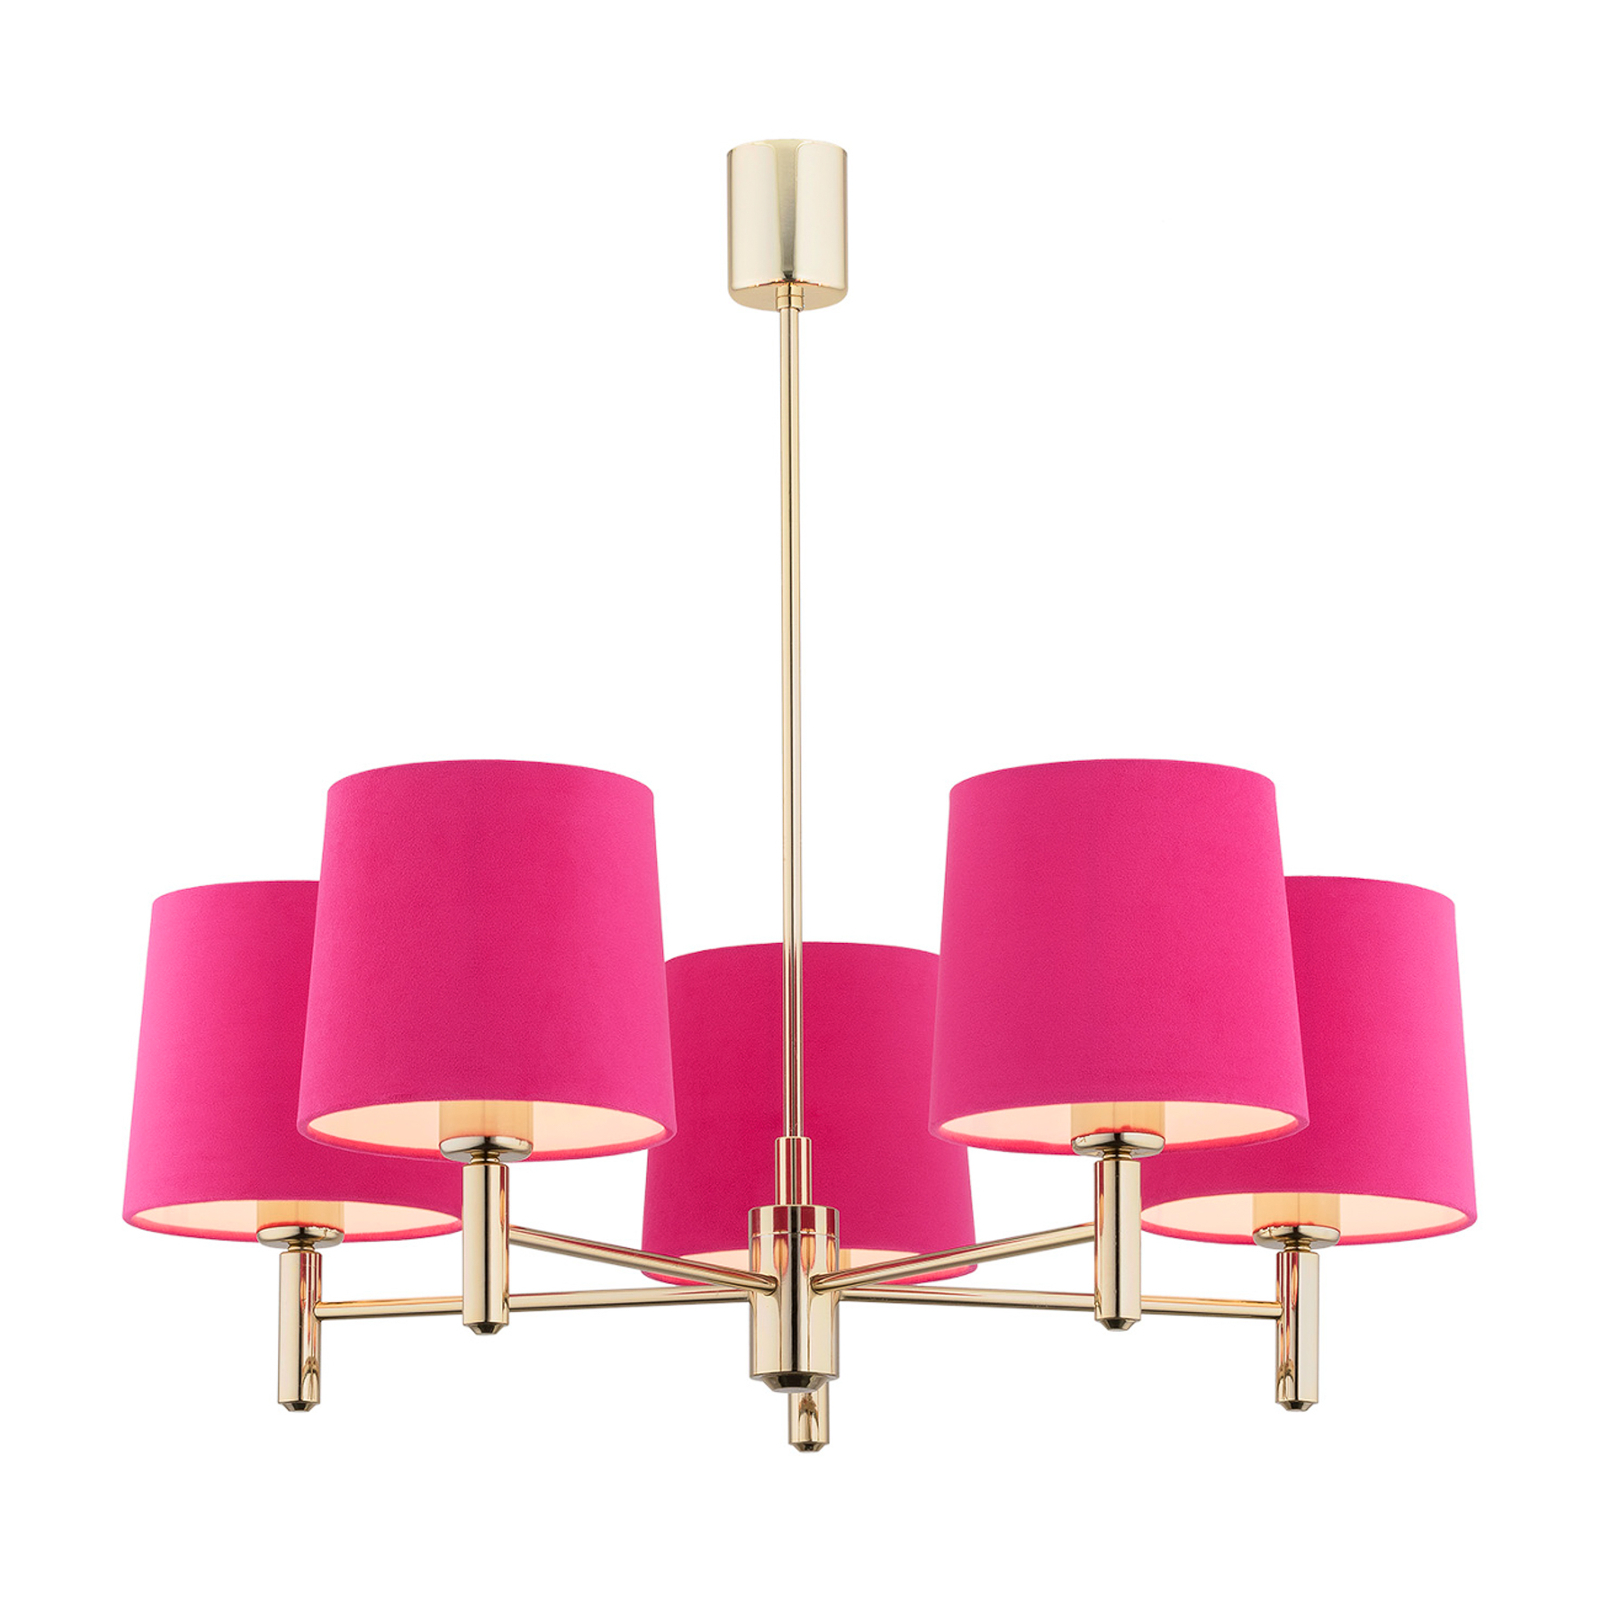 Hanglamp Polo 5-lamps messing/roze